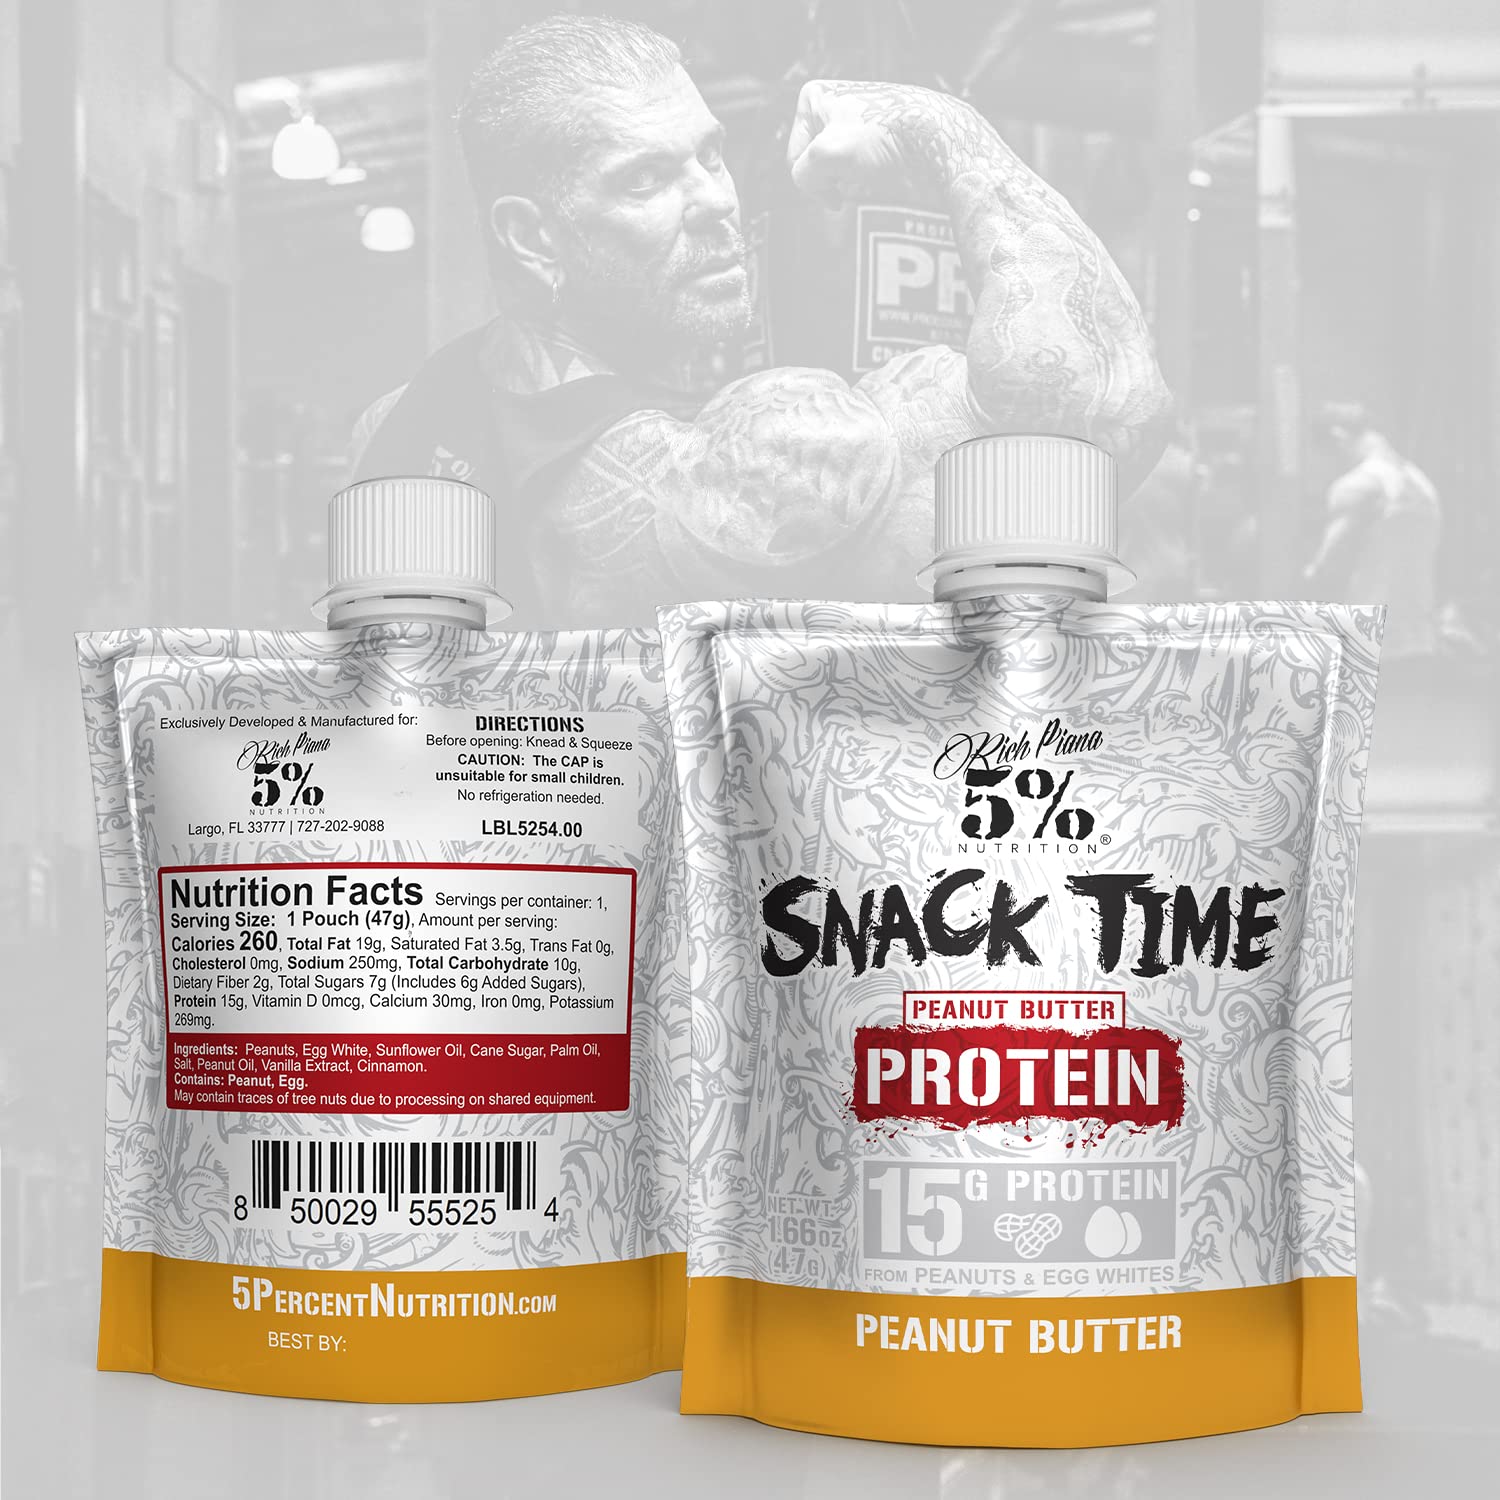 Rich Piana 5% Nutrition Snack Time | Squeezable Protein Shots | High Protein Snack Pouches | Convenient, Real Food Protein from Peanuts & Egg Whites | 10-Count (Peanut Butter) : Health & Household